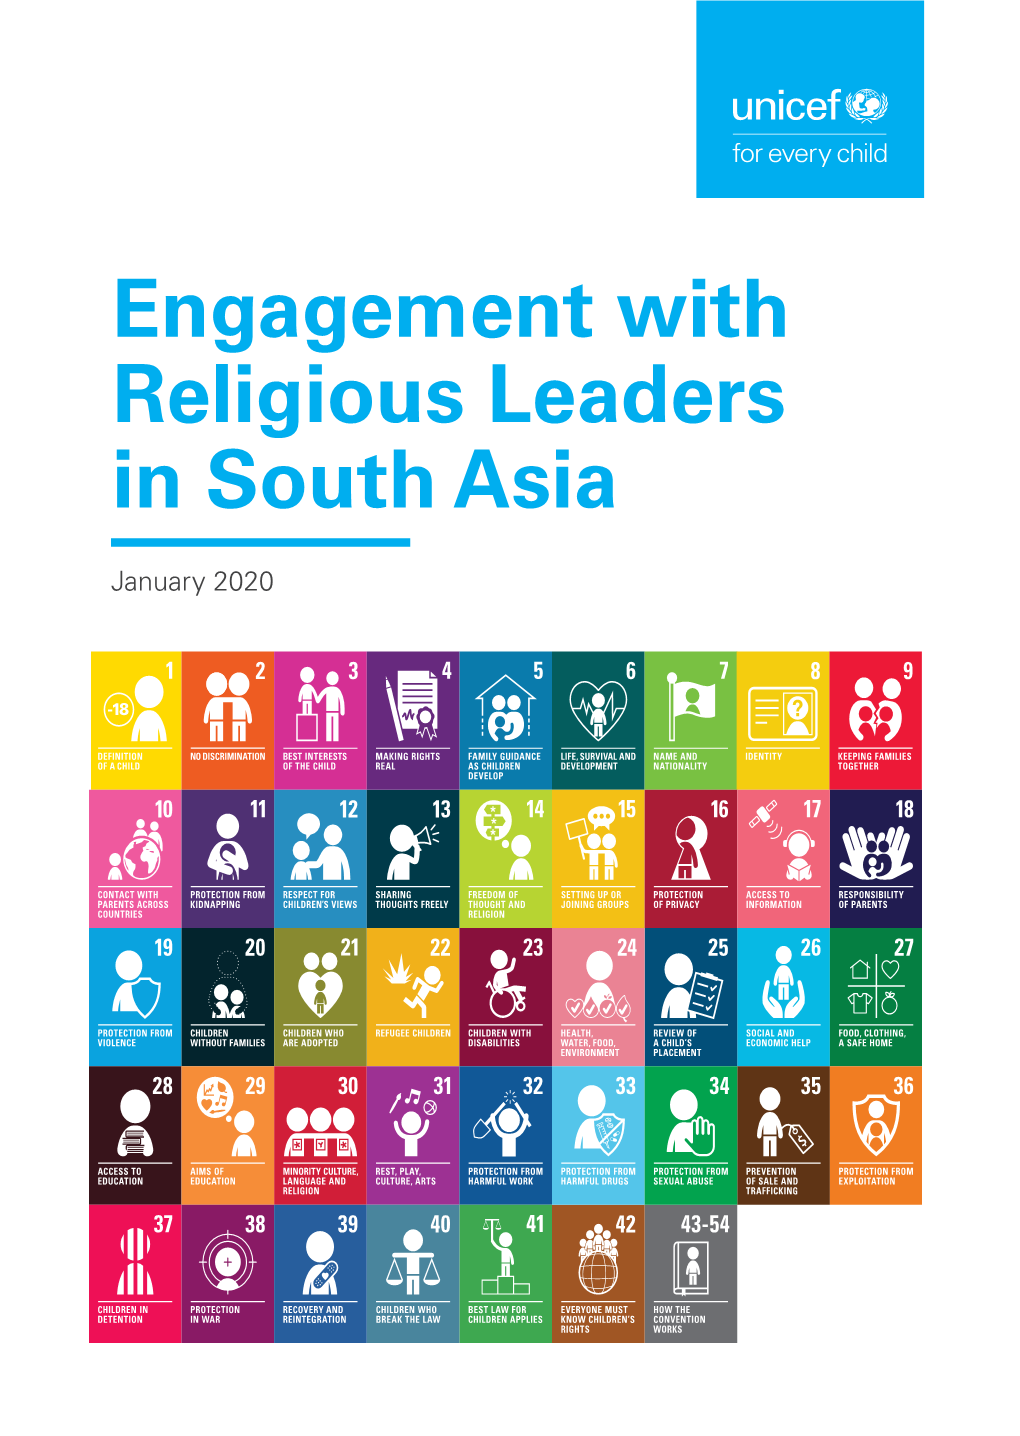 Engagement with Religious Leaders in South Asia